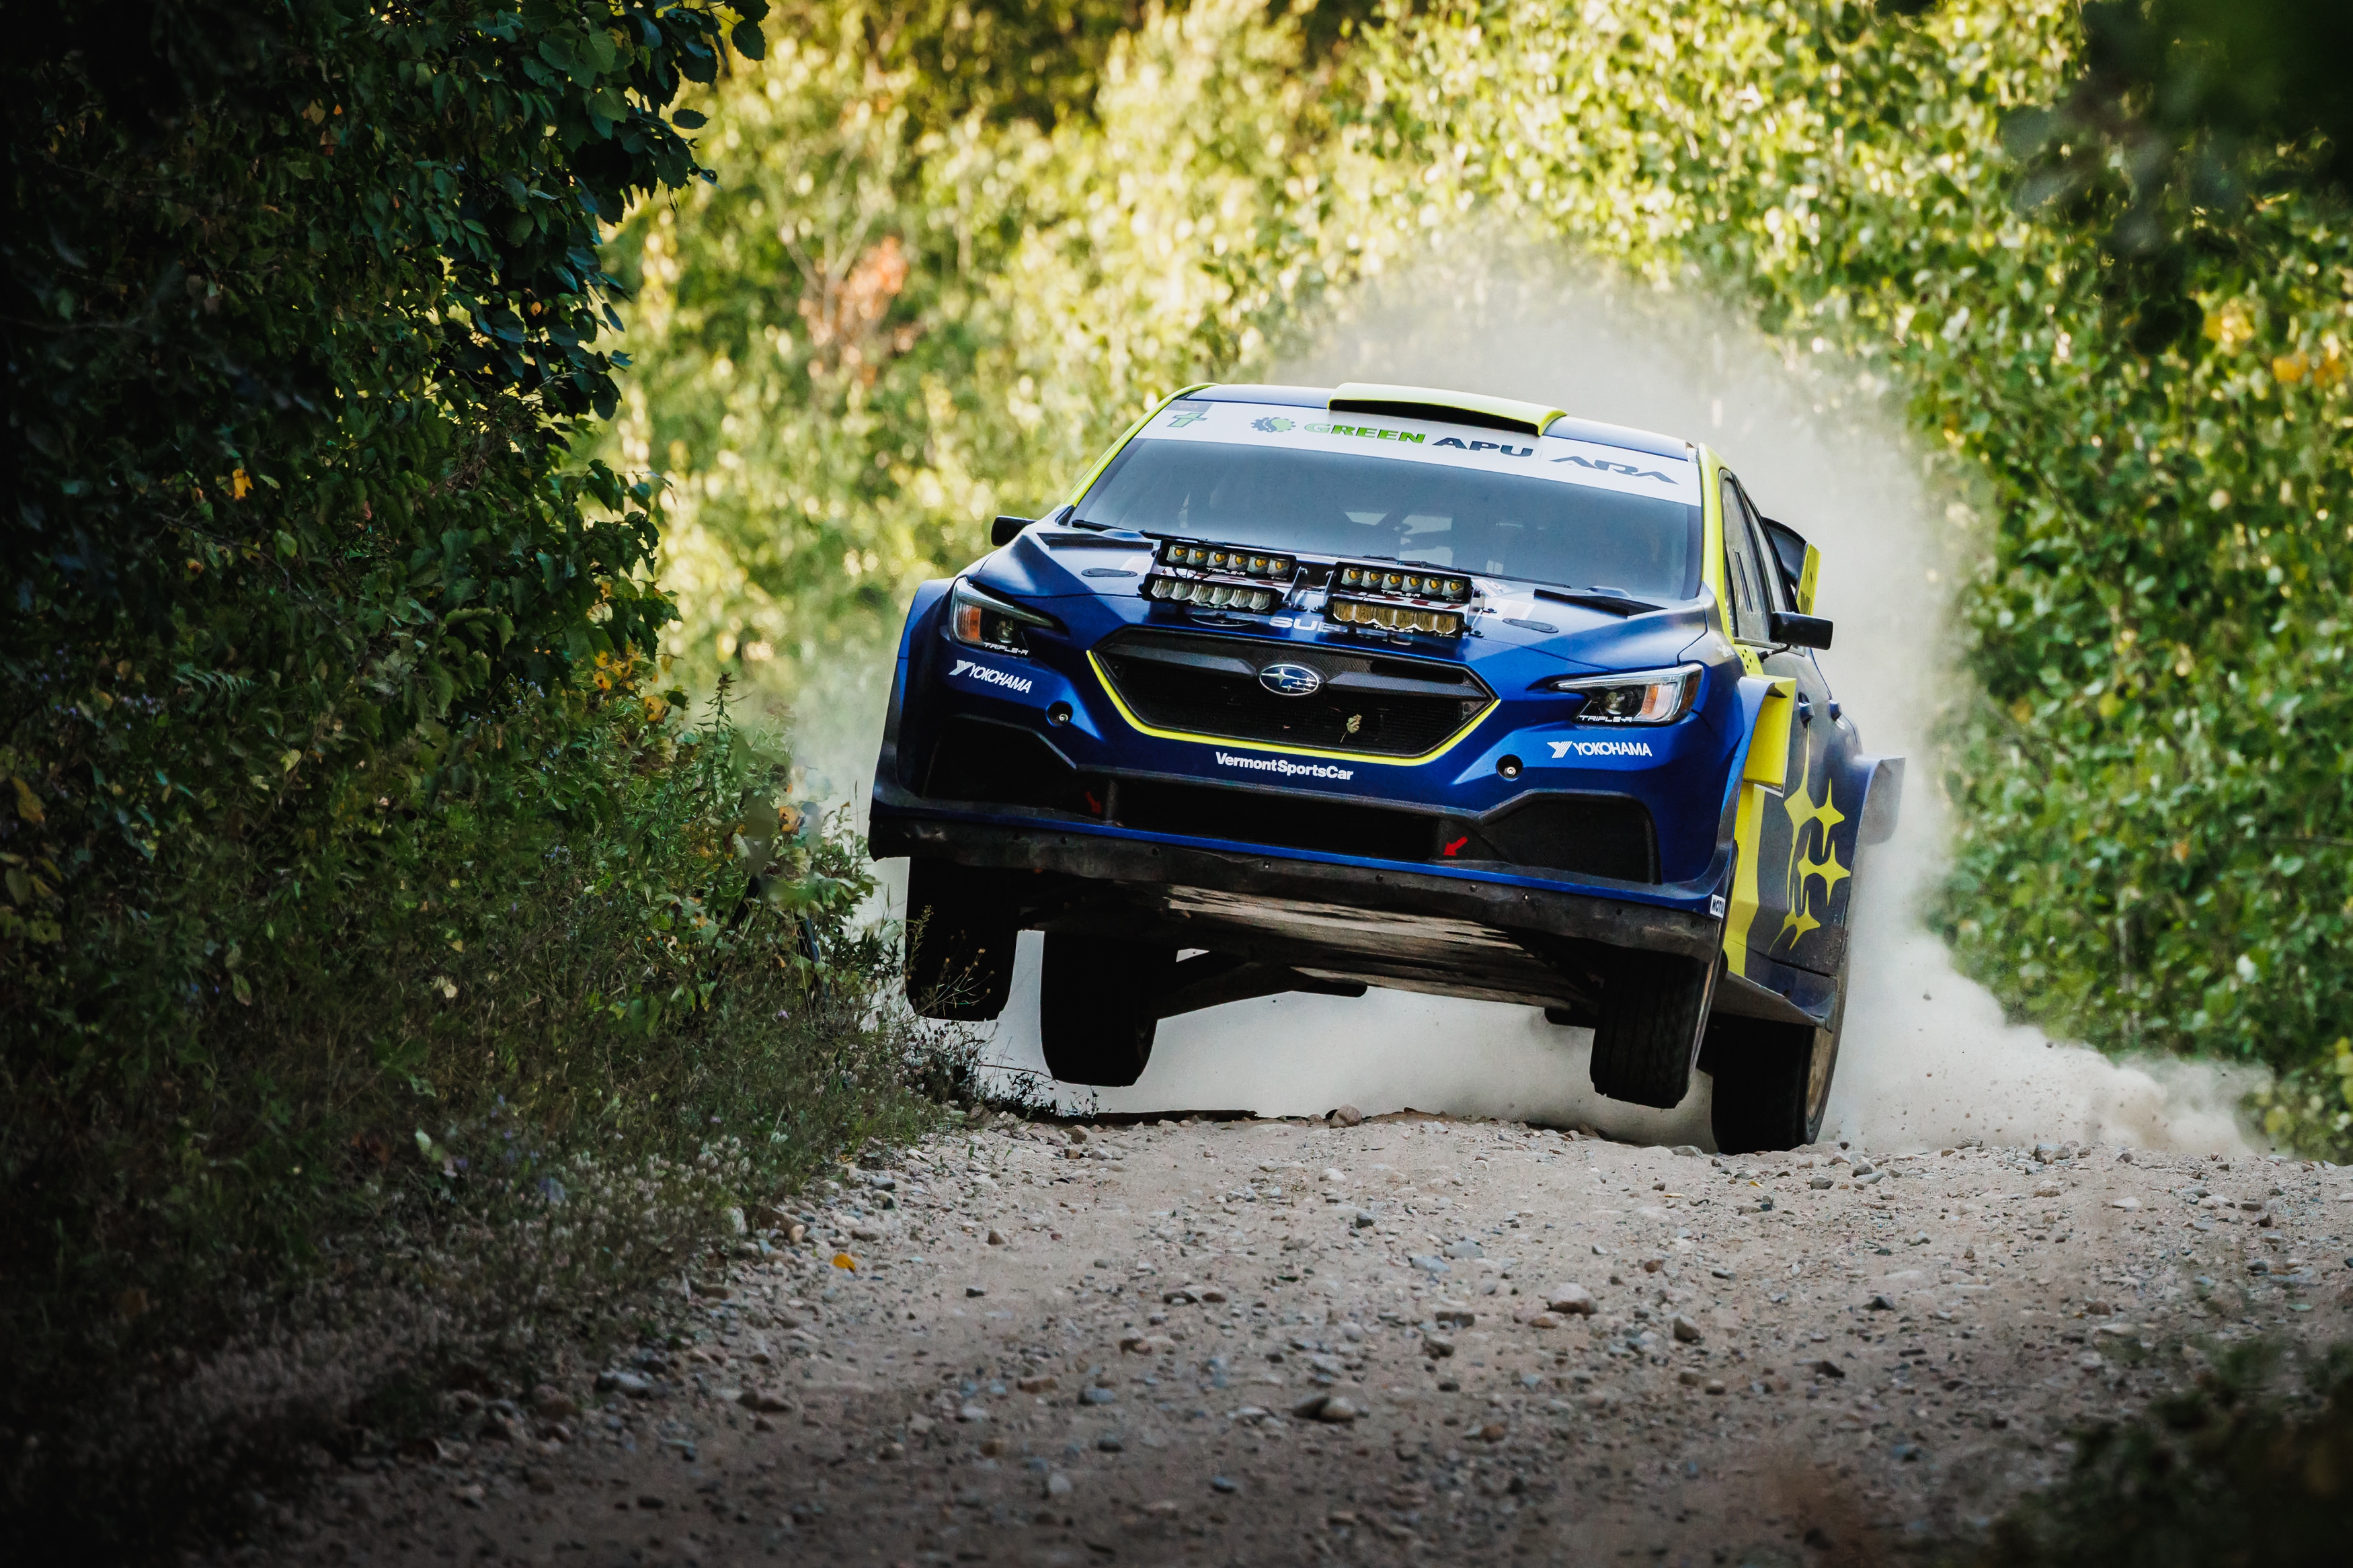 Subaru Motorsports USA driver Brandon Semenuk and co-driver Keaton Williams compete at the American Rally Association Ojibwe Forests Rally on August 26, winning in an all-new Subaru WRX rally car.